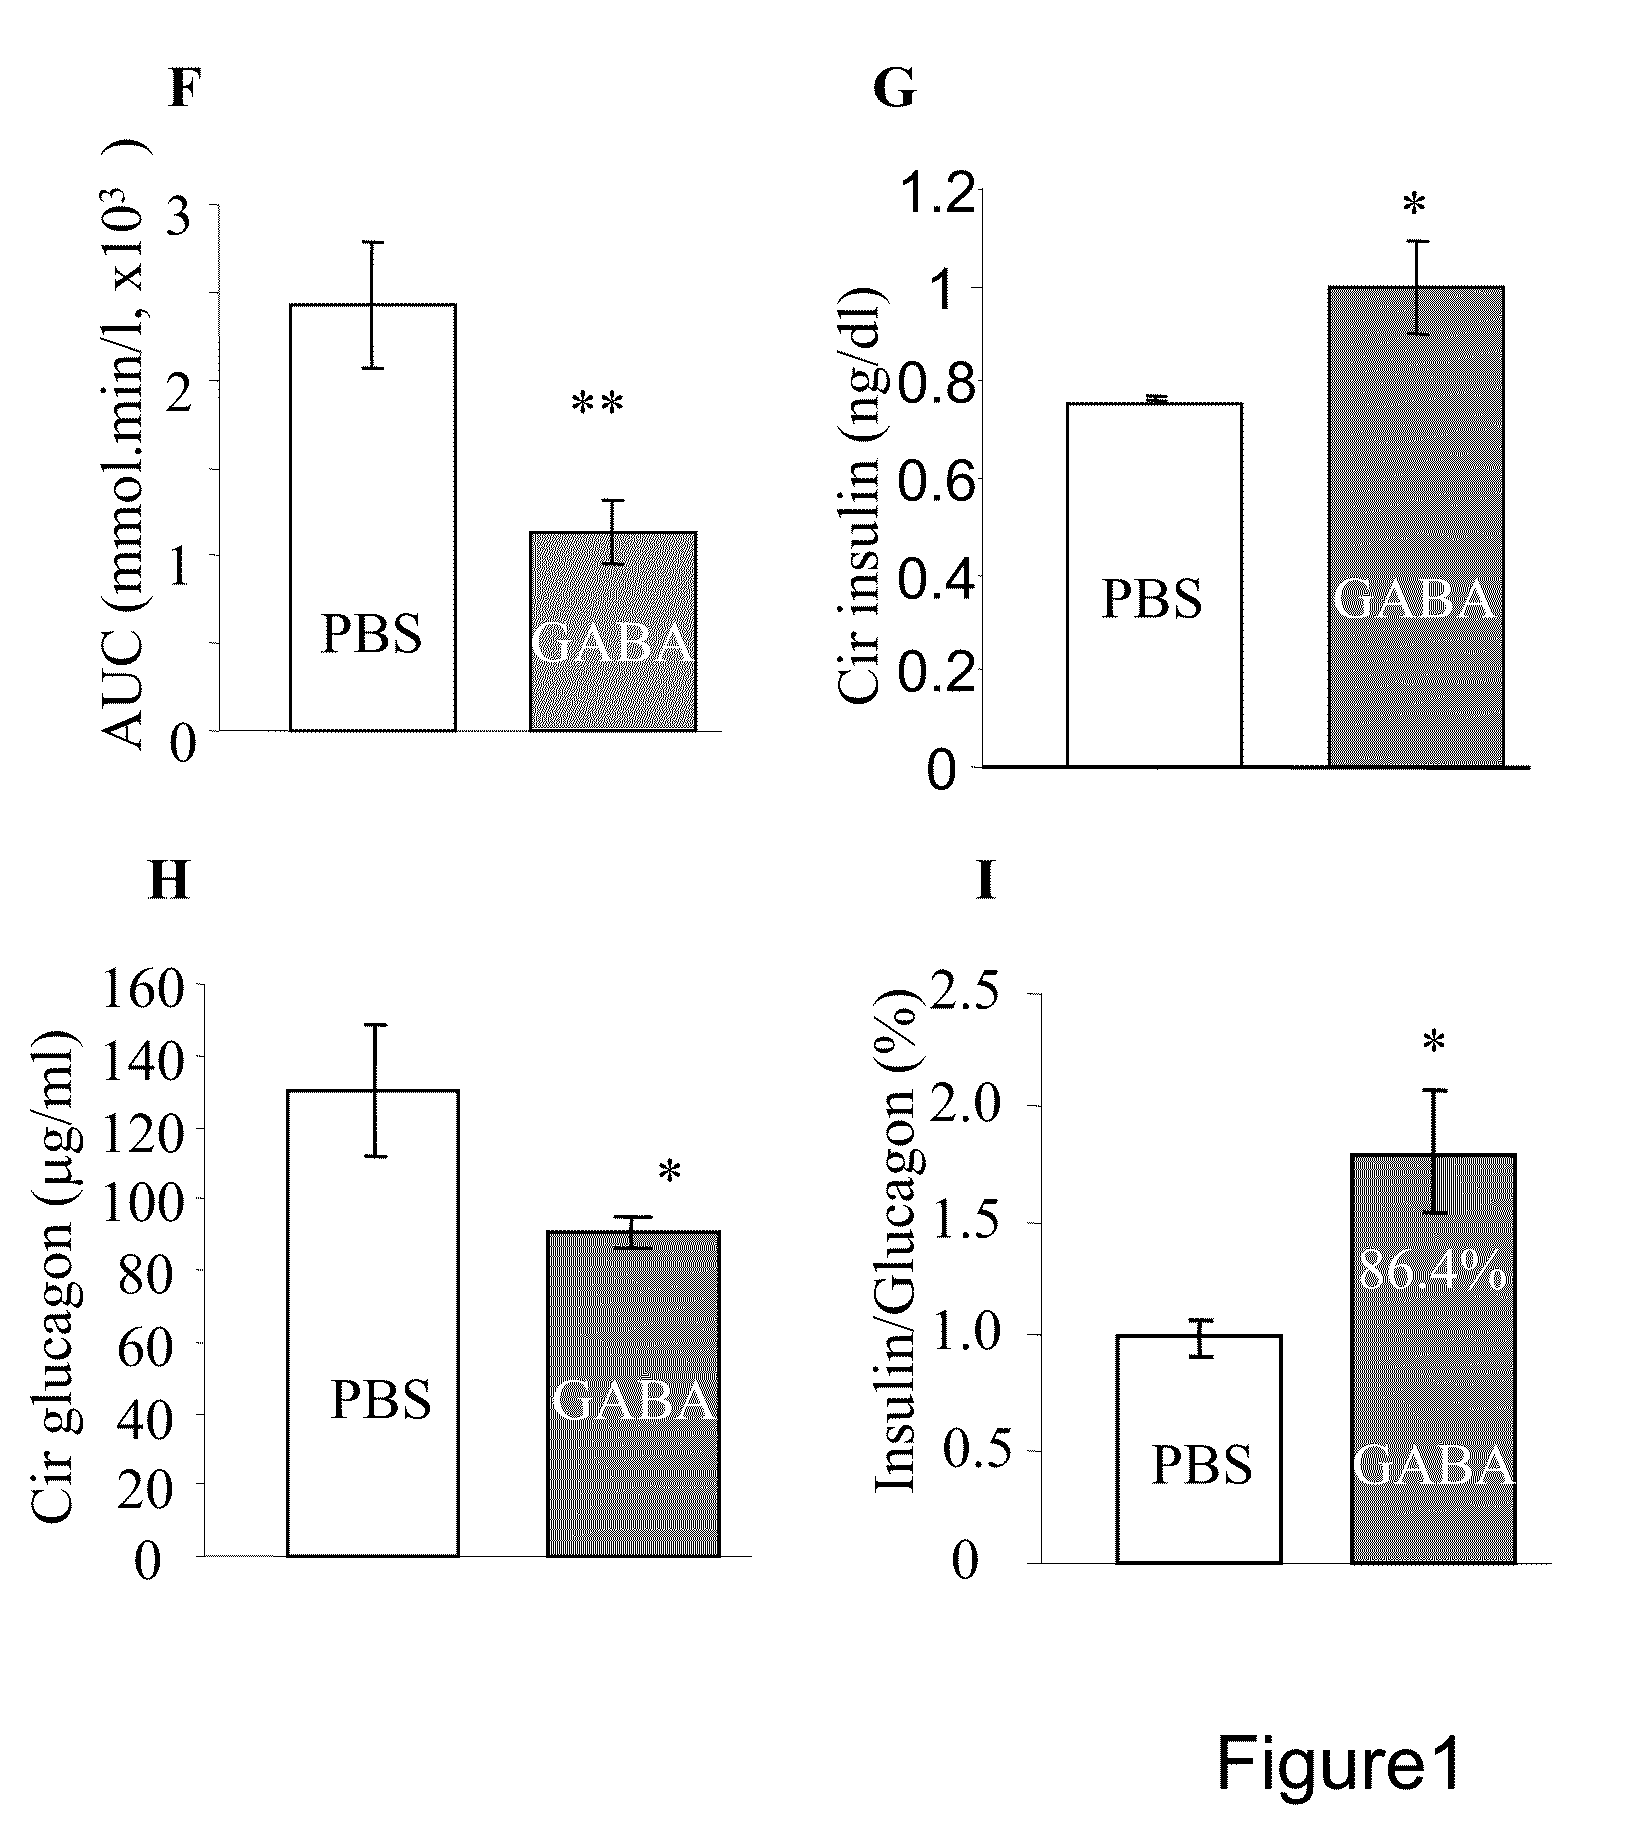 Method of ameliorating symptoms of type 1-diabetes using GABA related compounds and GLP-1/exendin-4 compounds